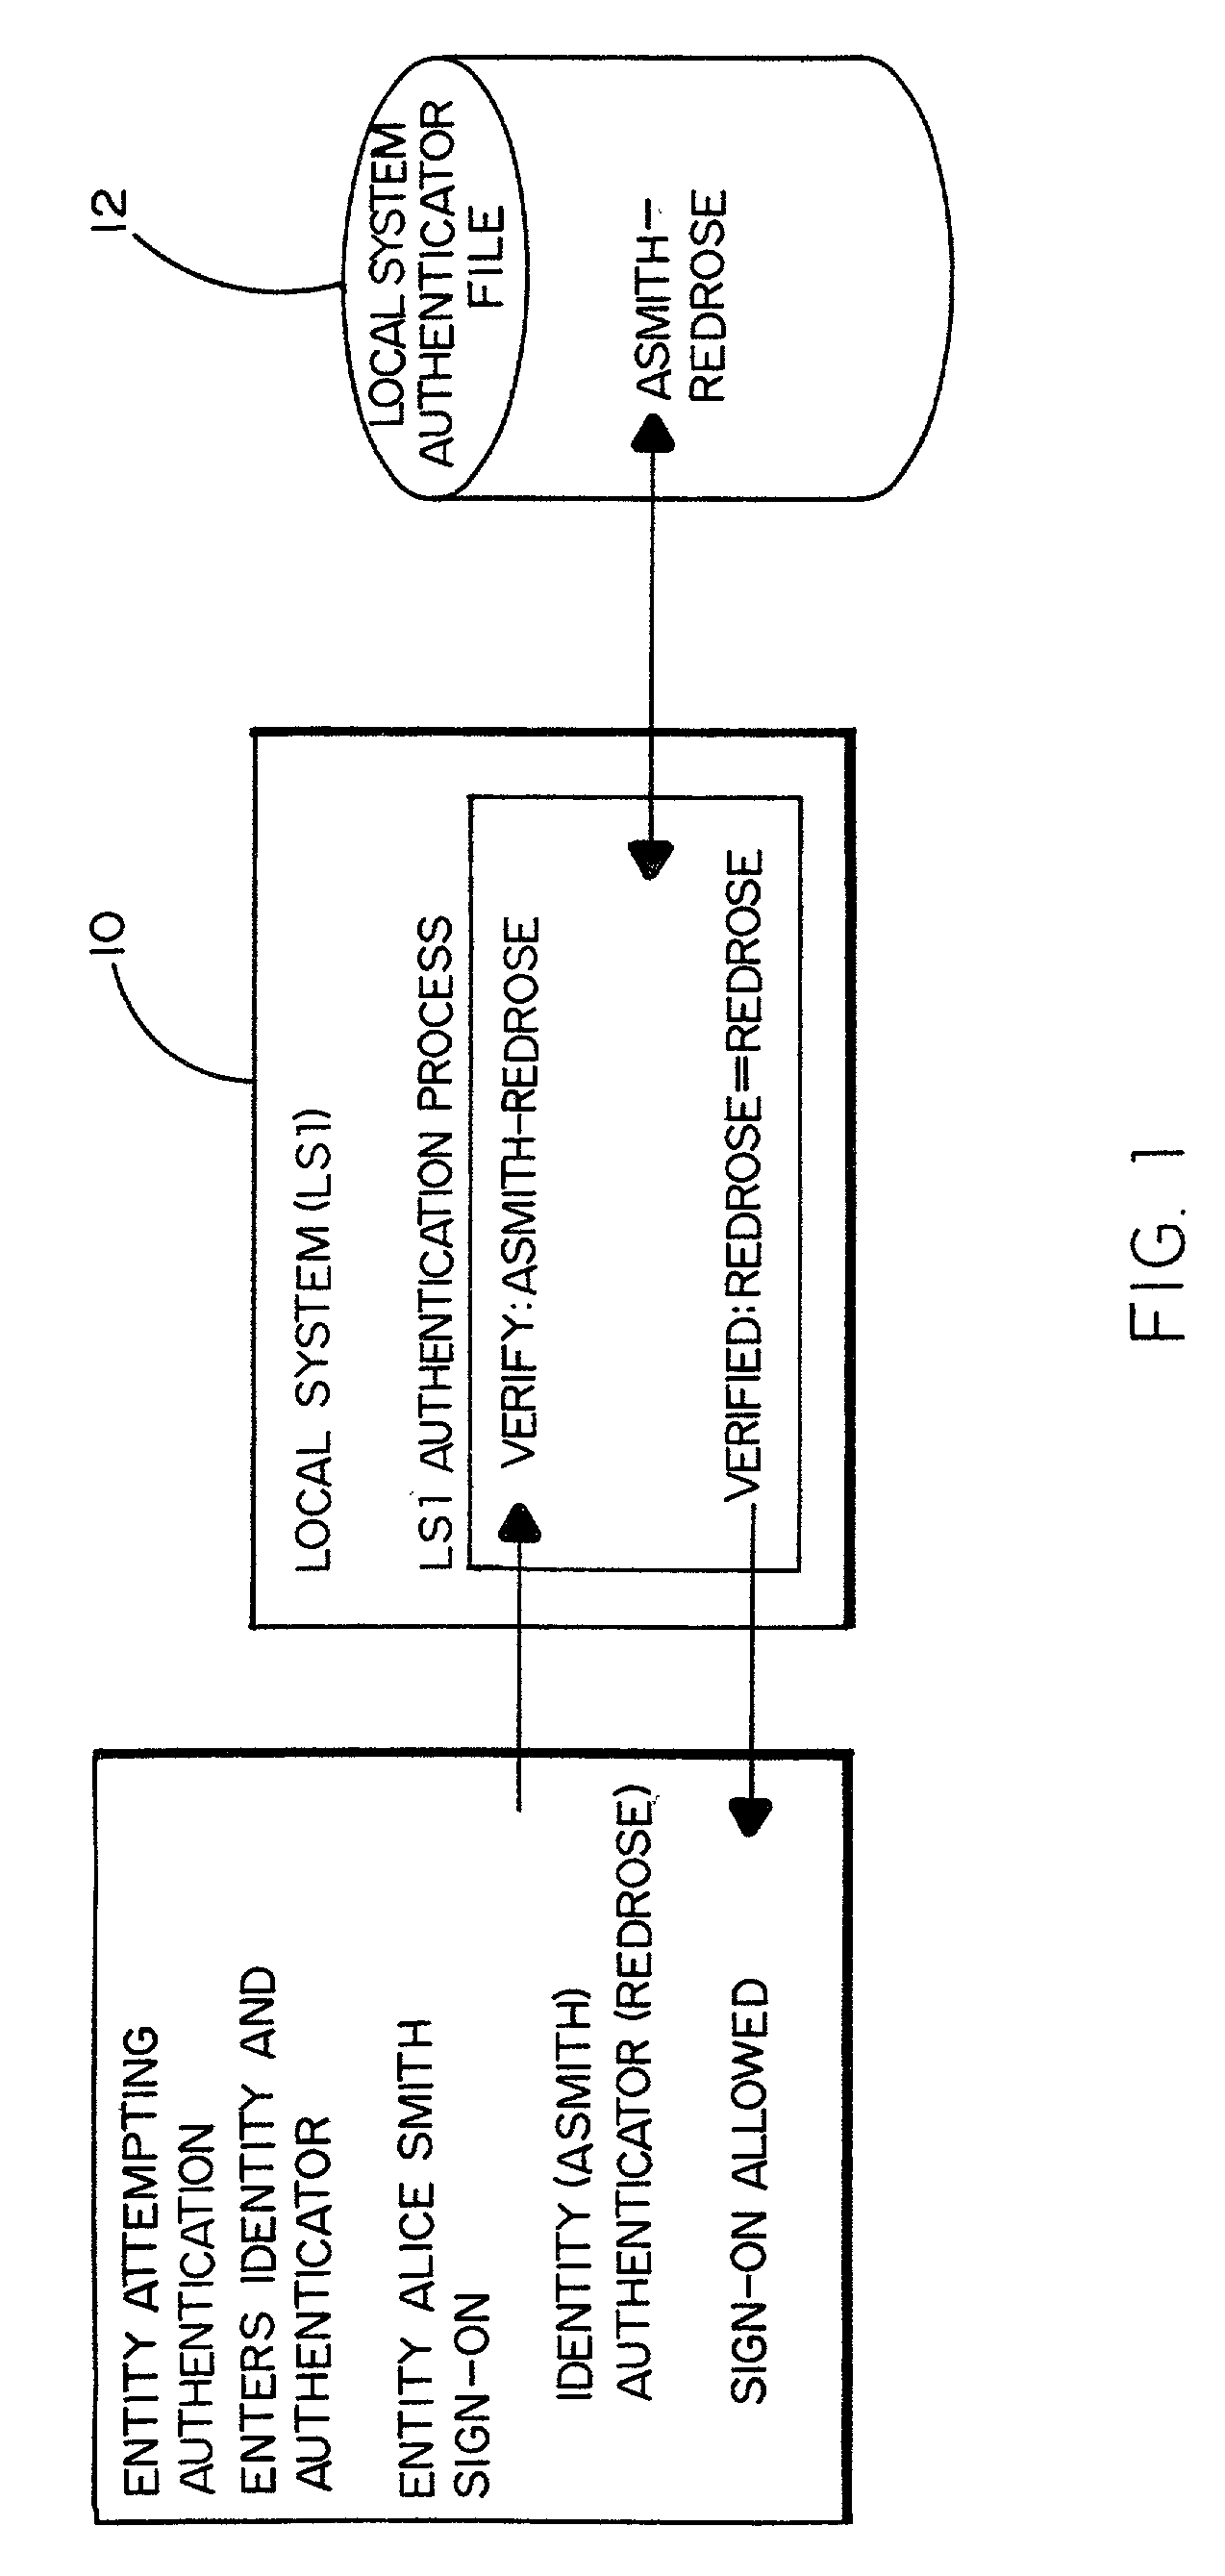 Method and system for detecting and preventing an intrusion in multiple platform computing environments